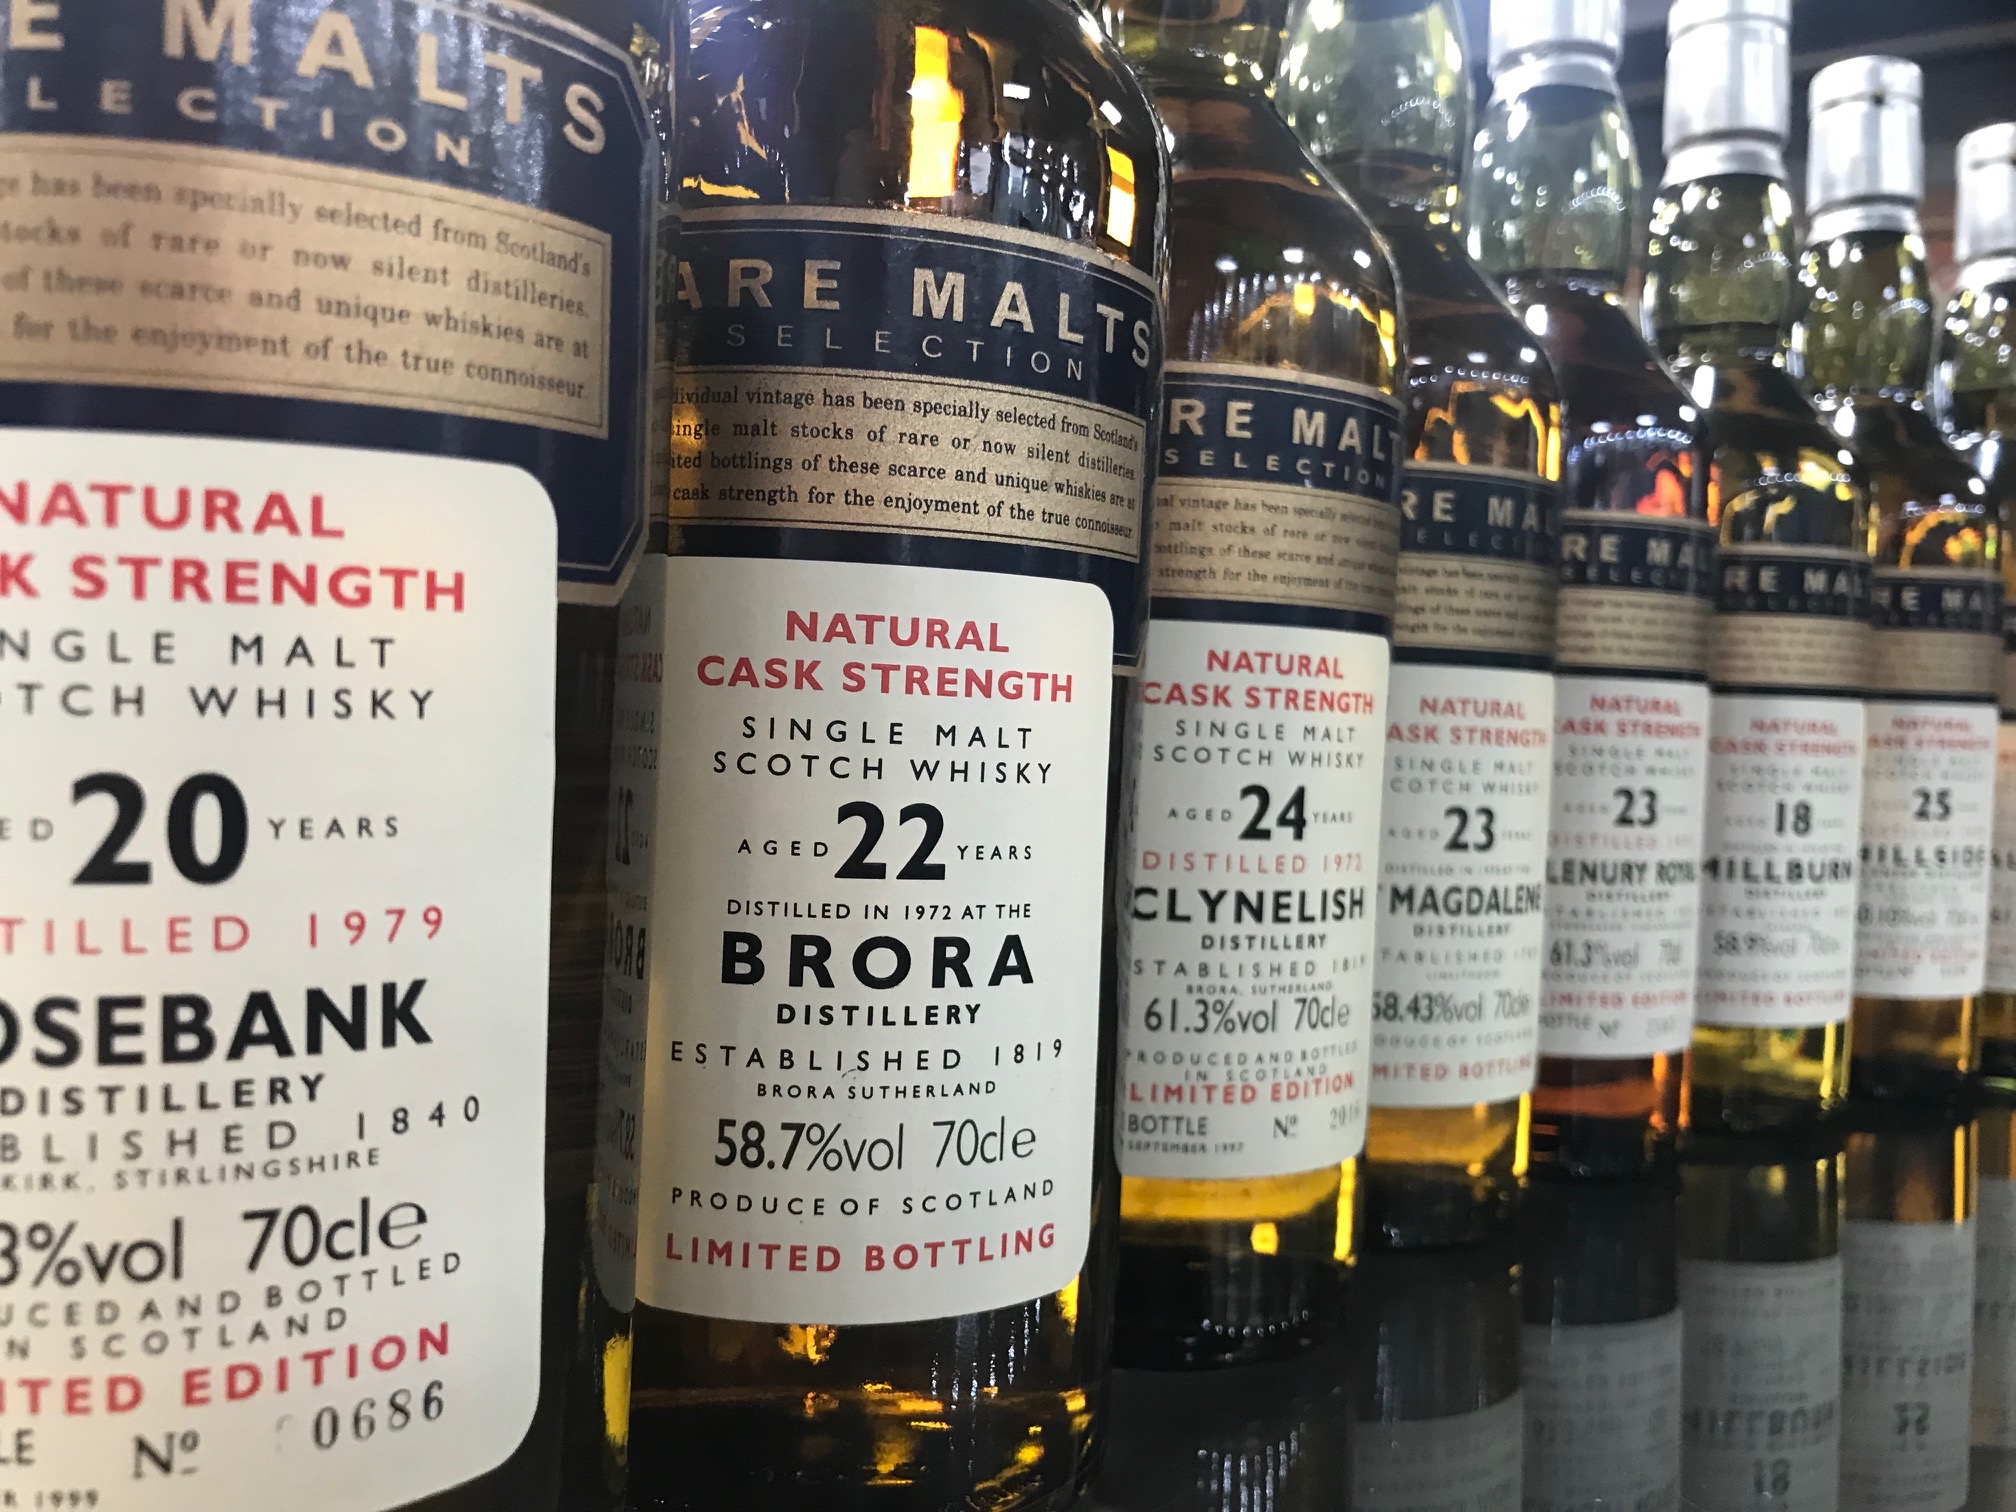 The Special Rare Malts Selection